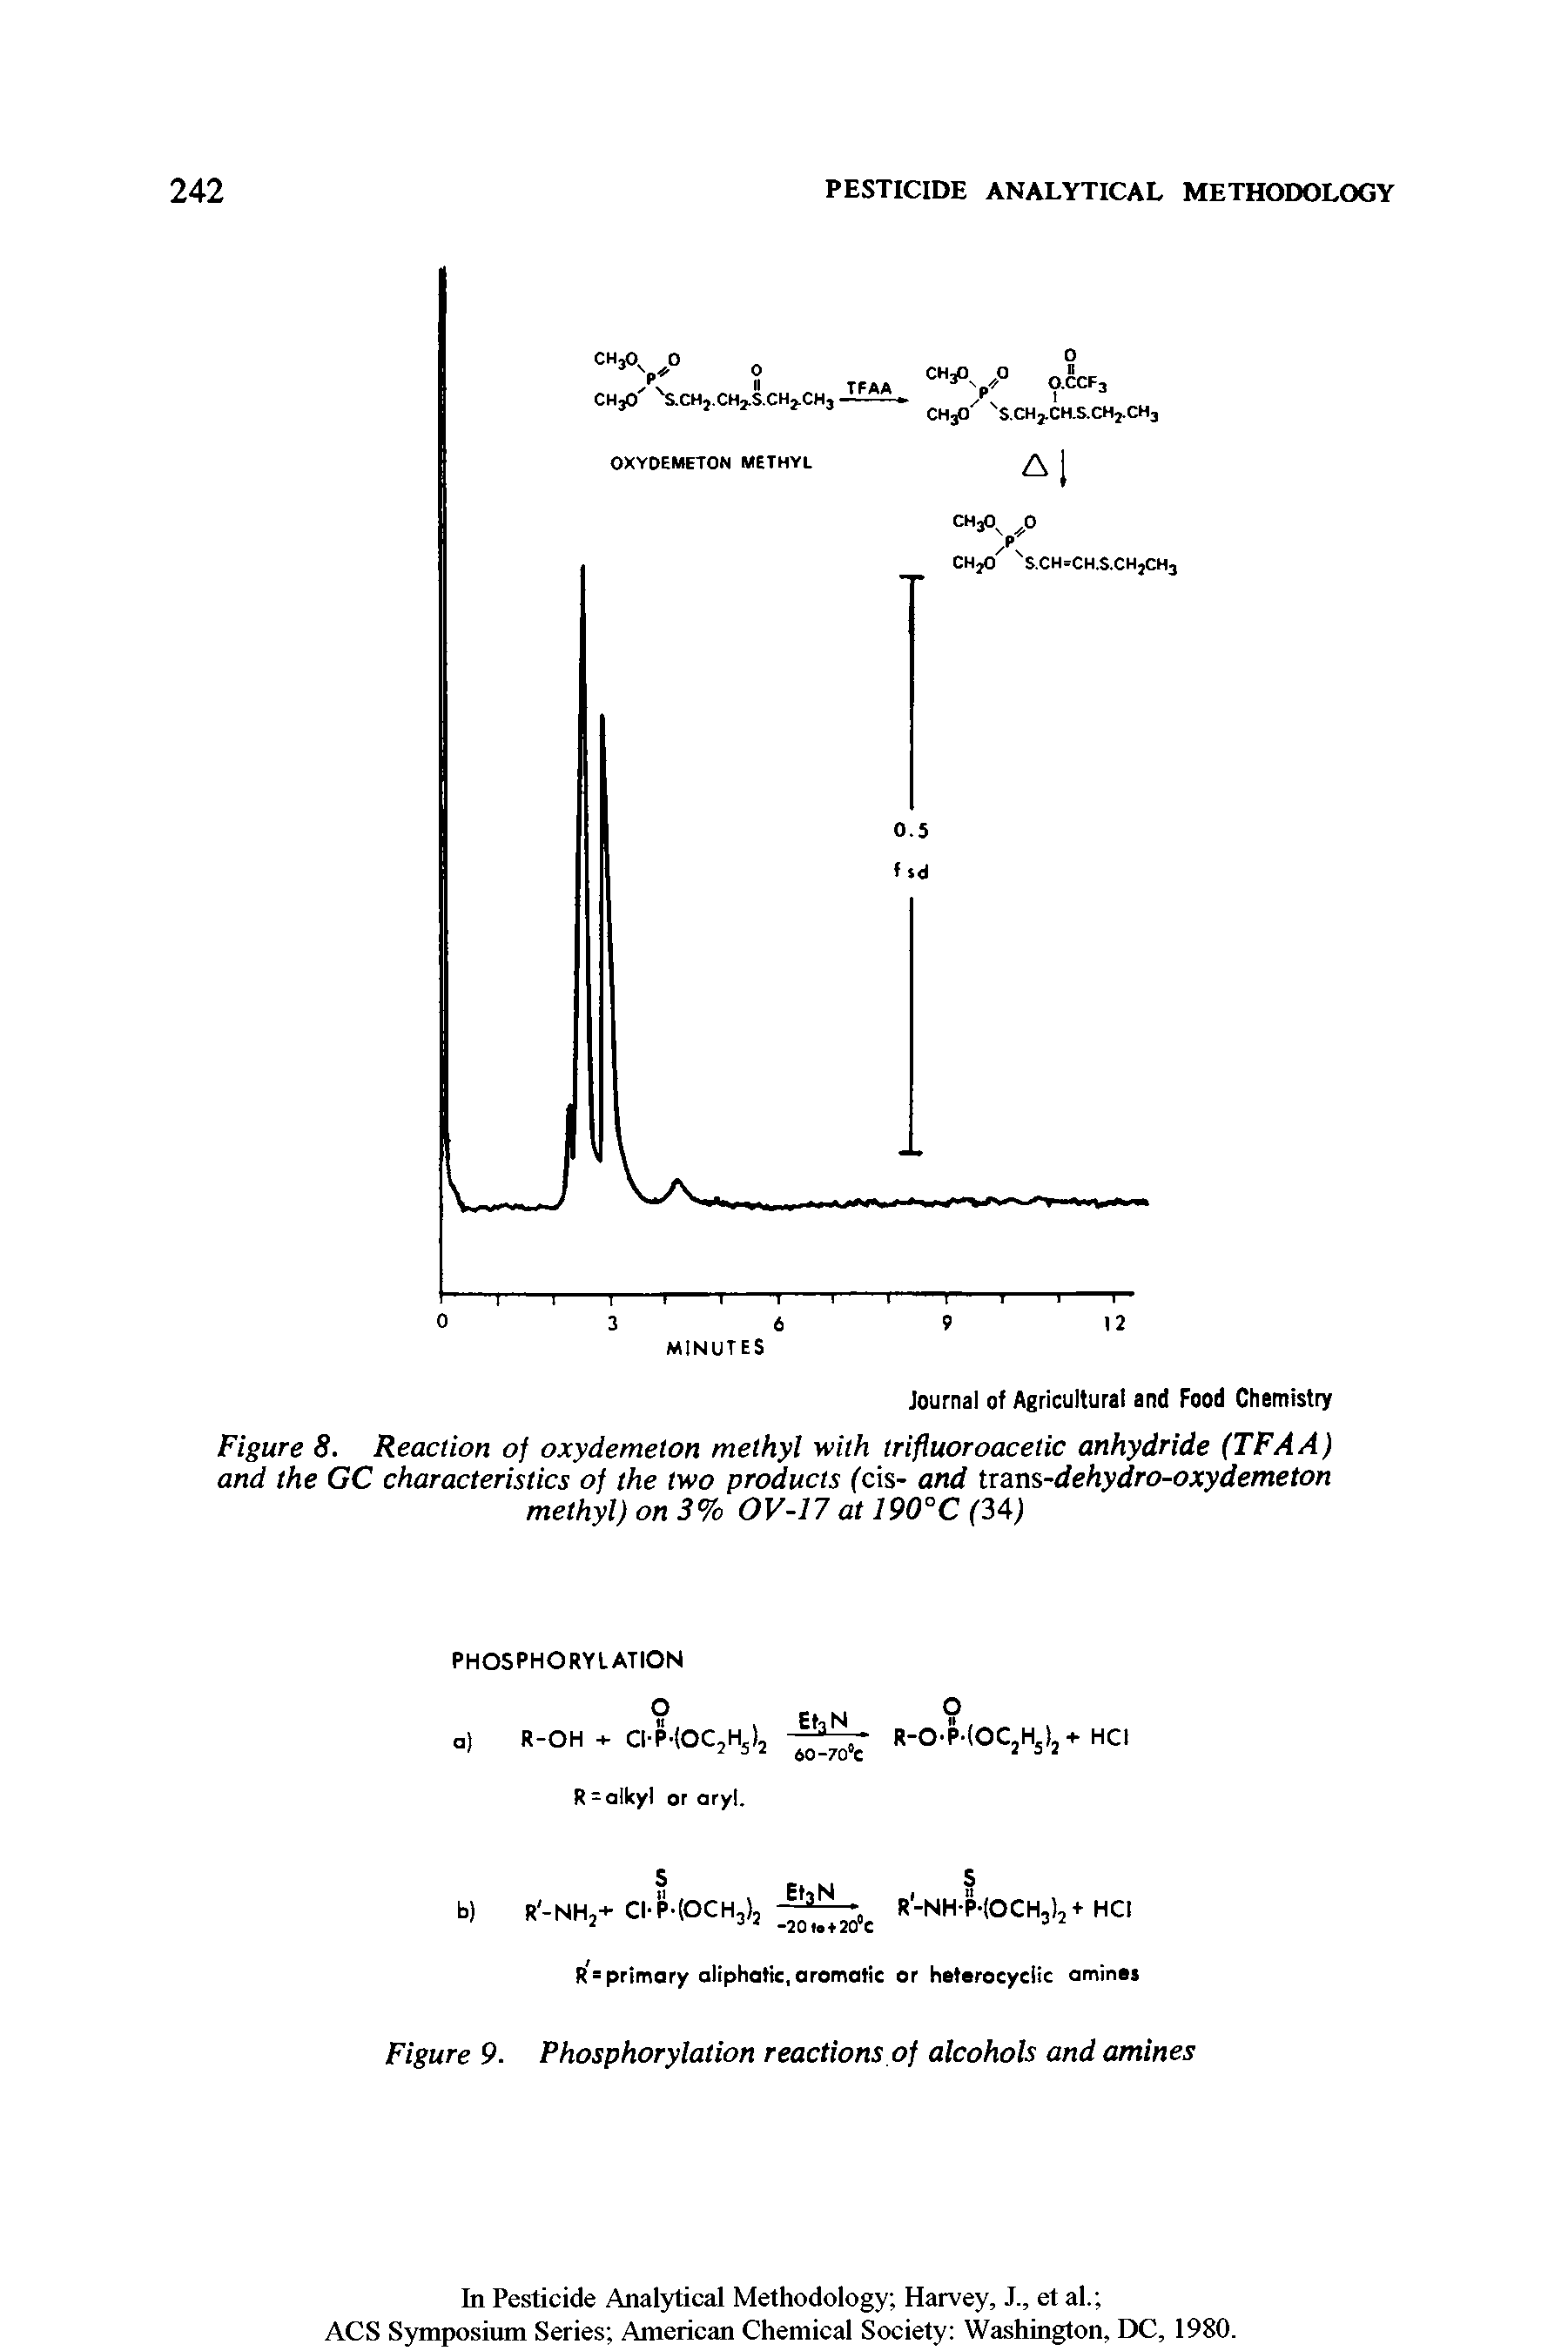 Figure 8. Reaction of oxydemeton methyl with trifluoroacetic anhydride (TFAA) and the GC characteristics of the two products fcis- and tram-dehydro-oxydemeton methyl) on 3% OV-17 at 190°C (34)...